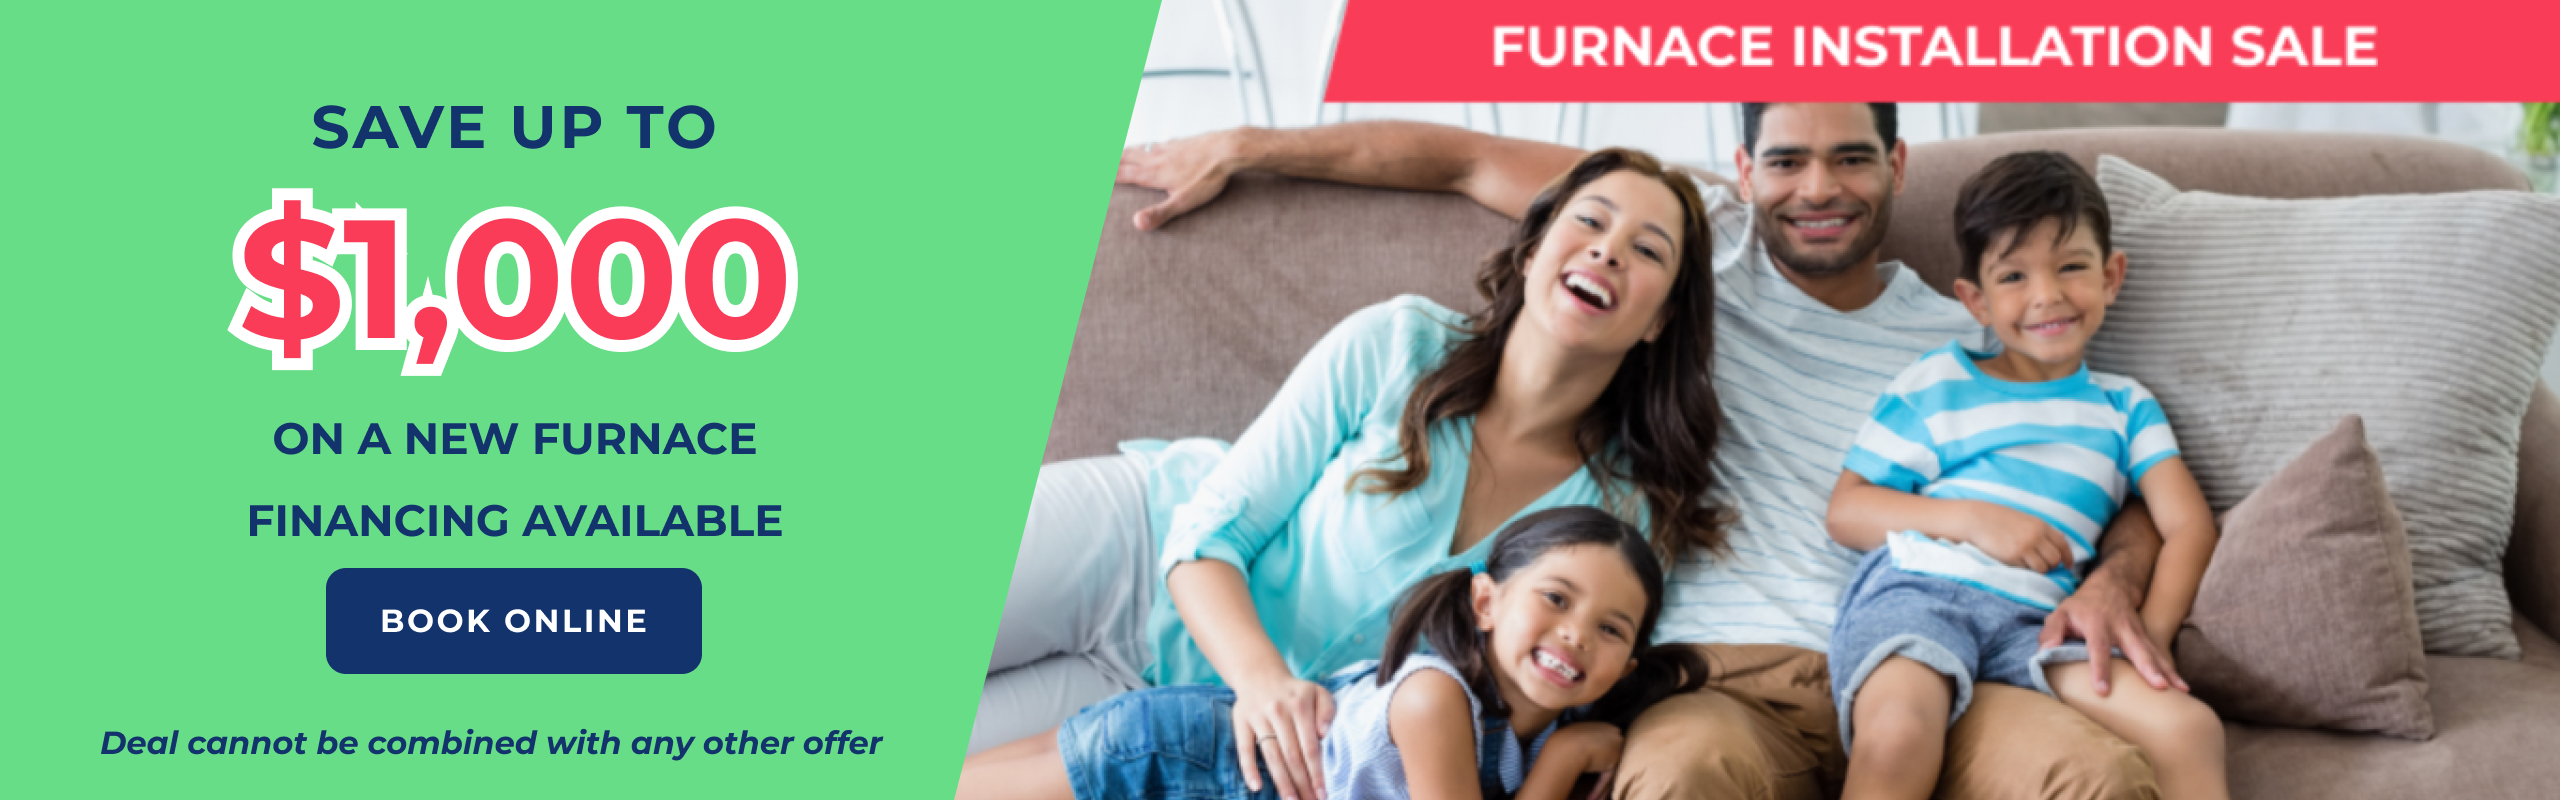 Furnace installation: Save up to $1000 on a new furnace